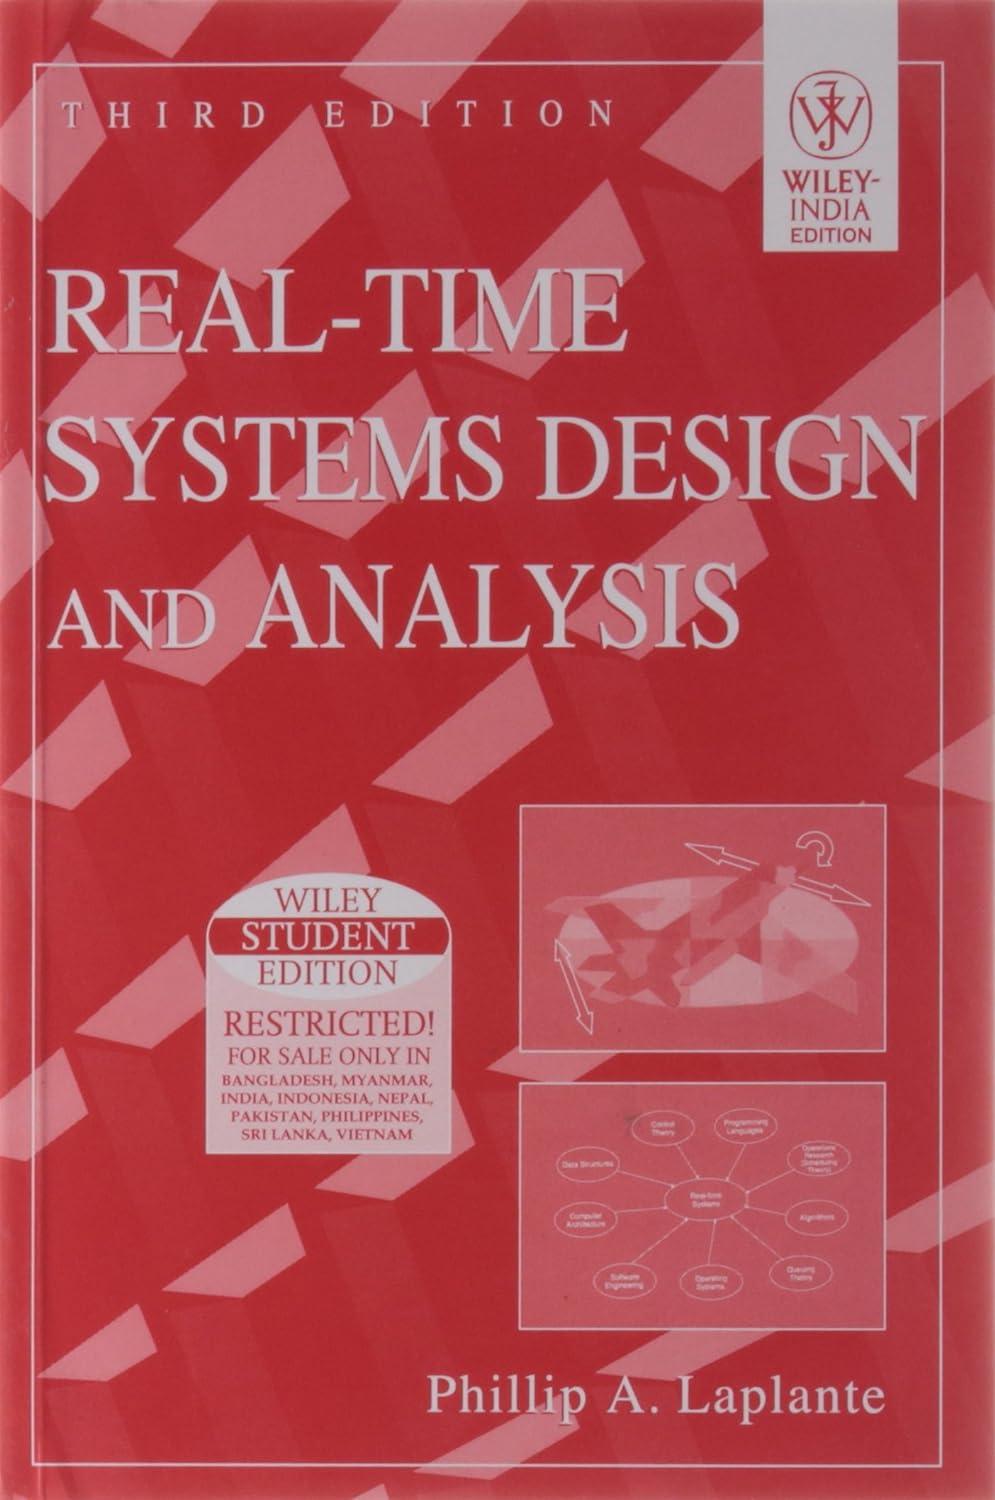 real time systems design  analysis 3rd edition phillip a. laplante 8126508302, 978-8126508303